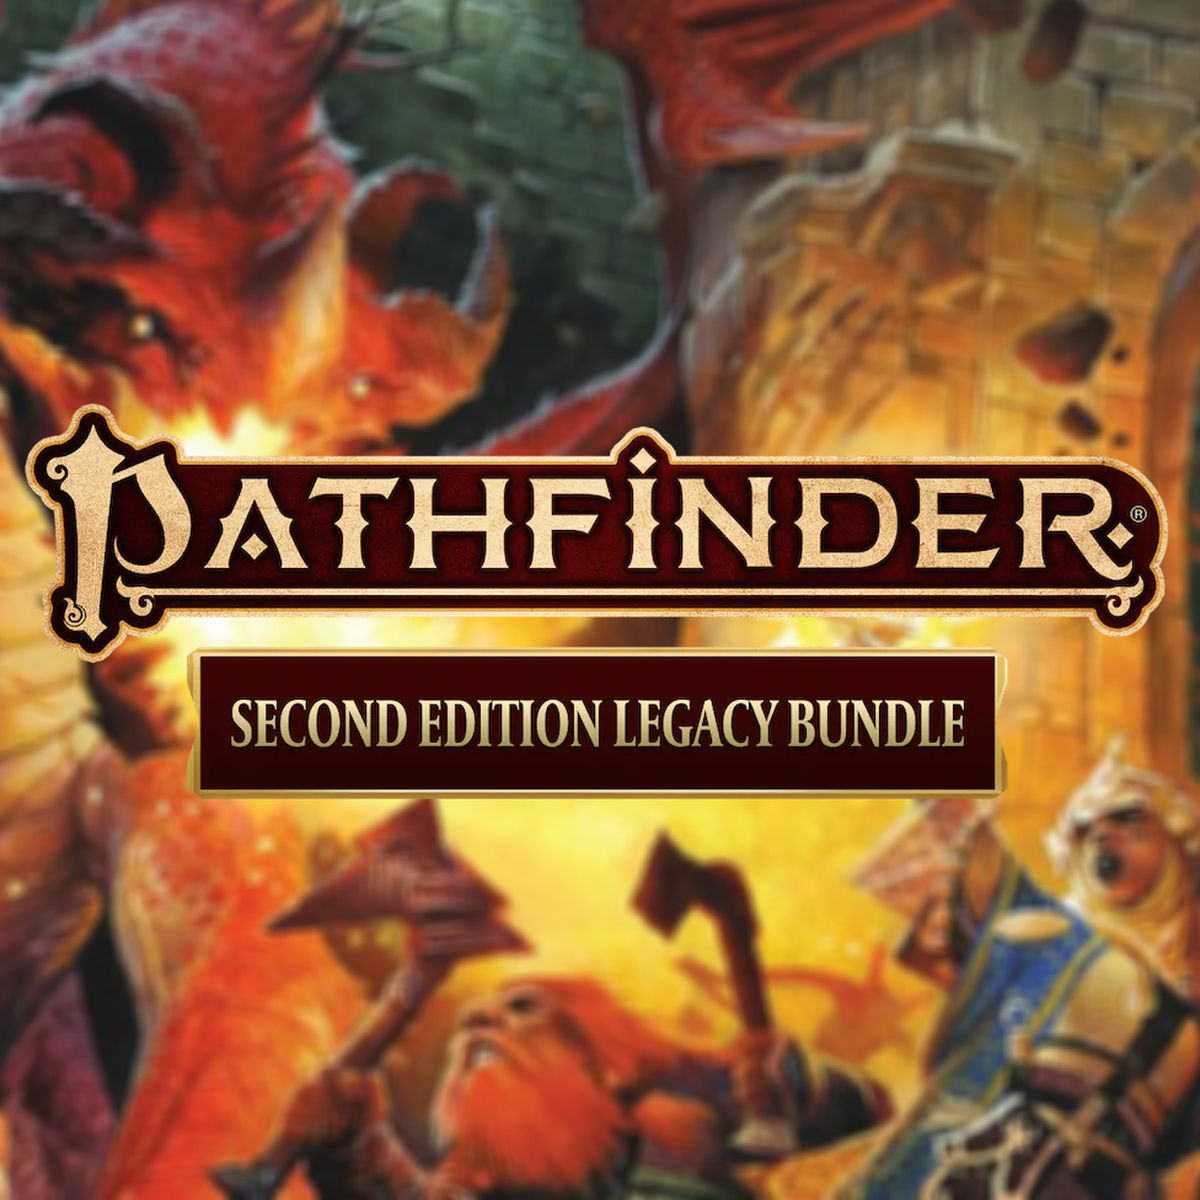 Acquire 25 Pathfinder Books at Humble for Just $25